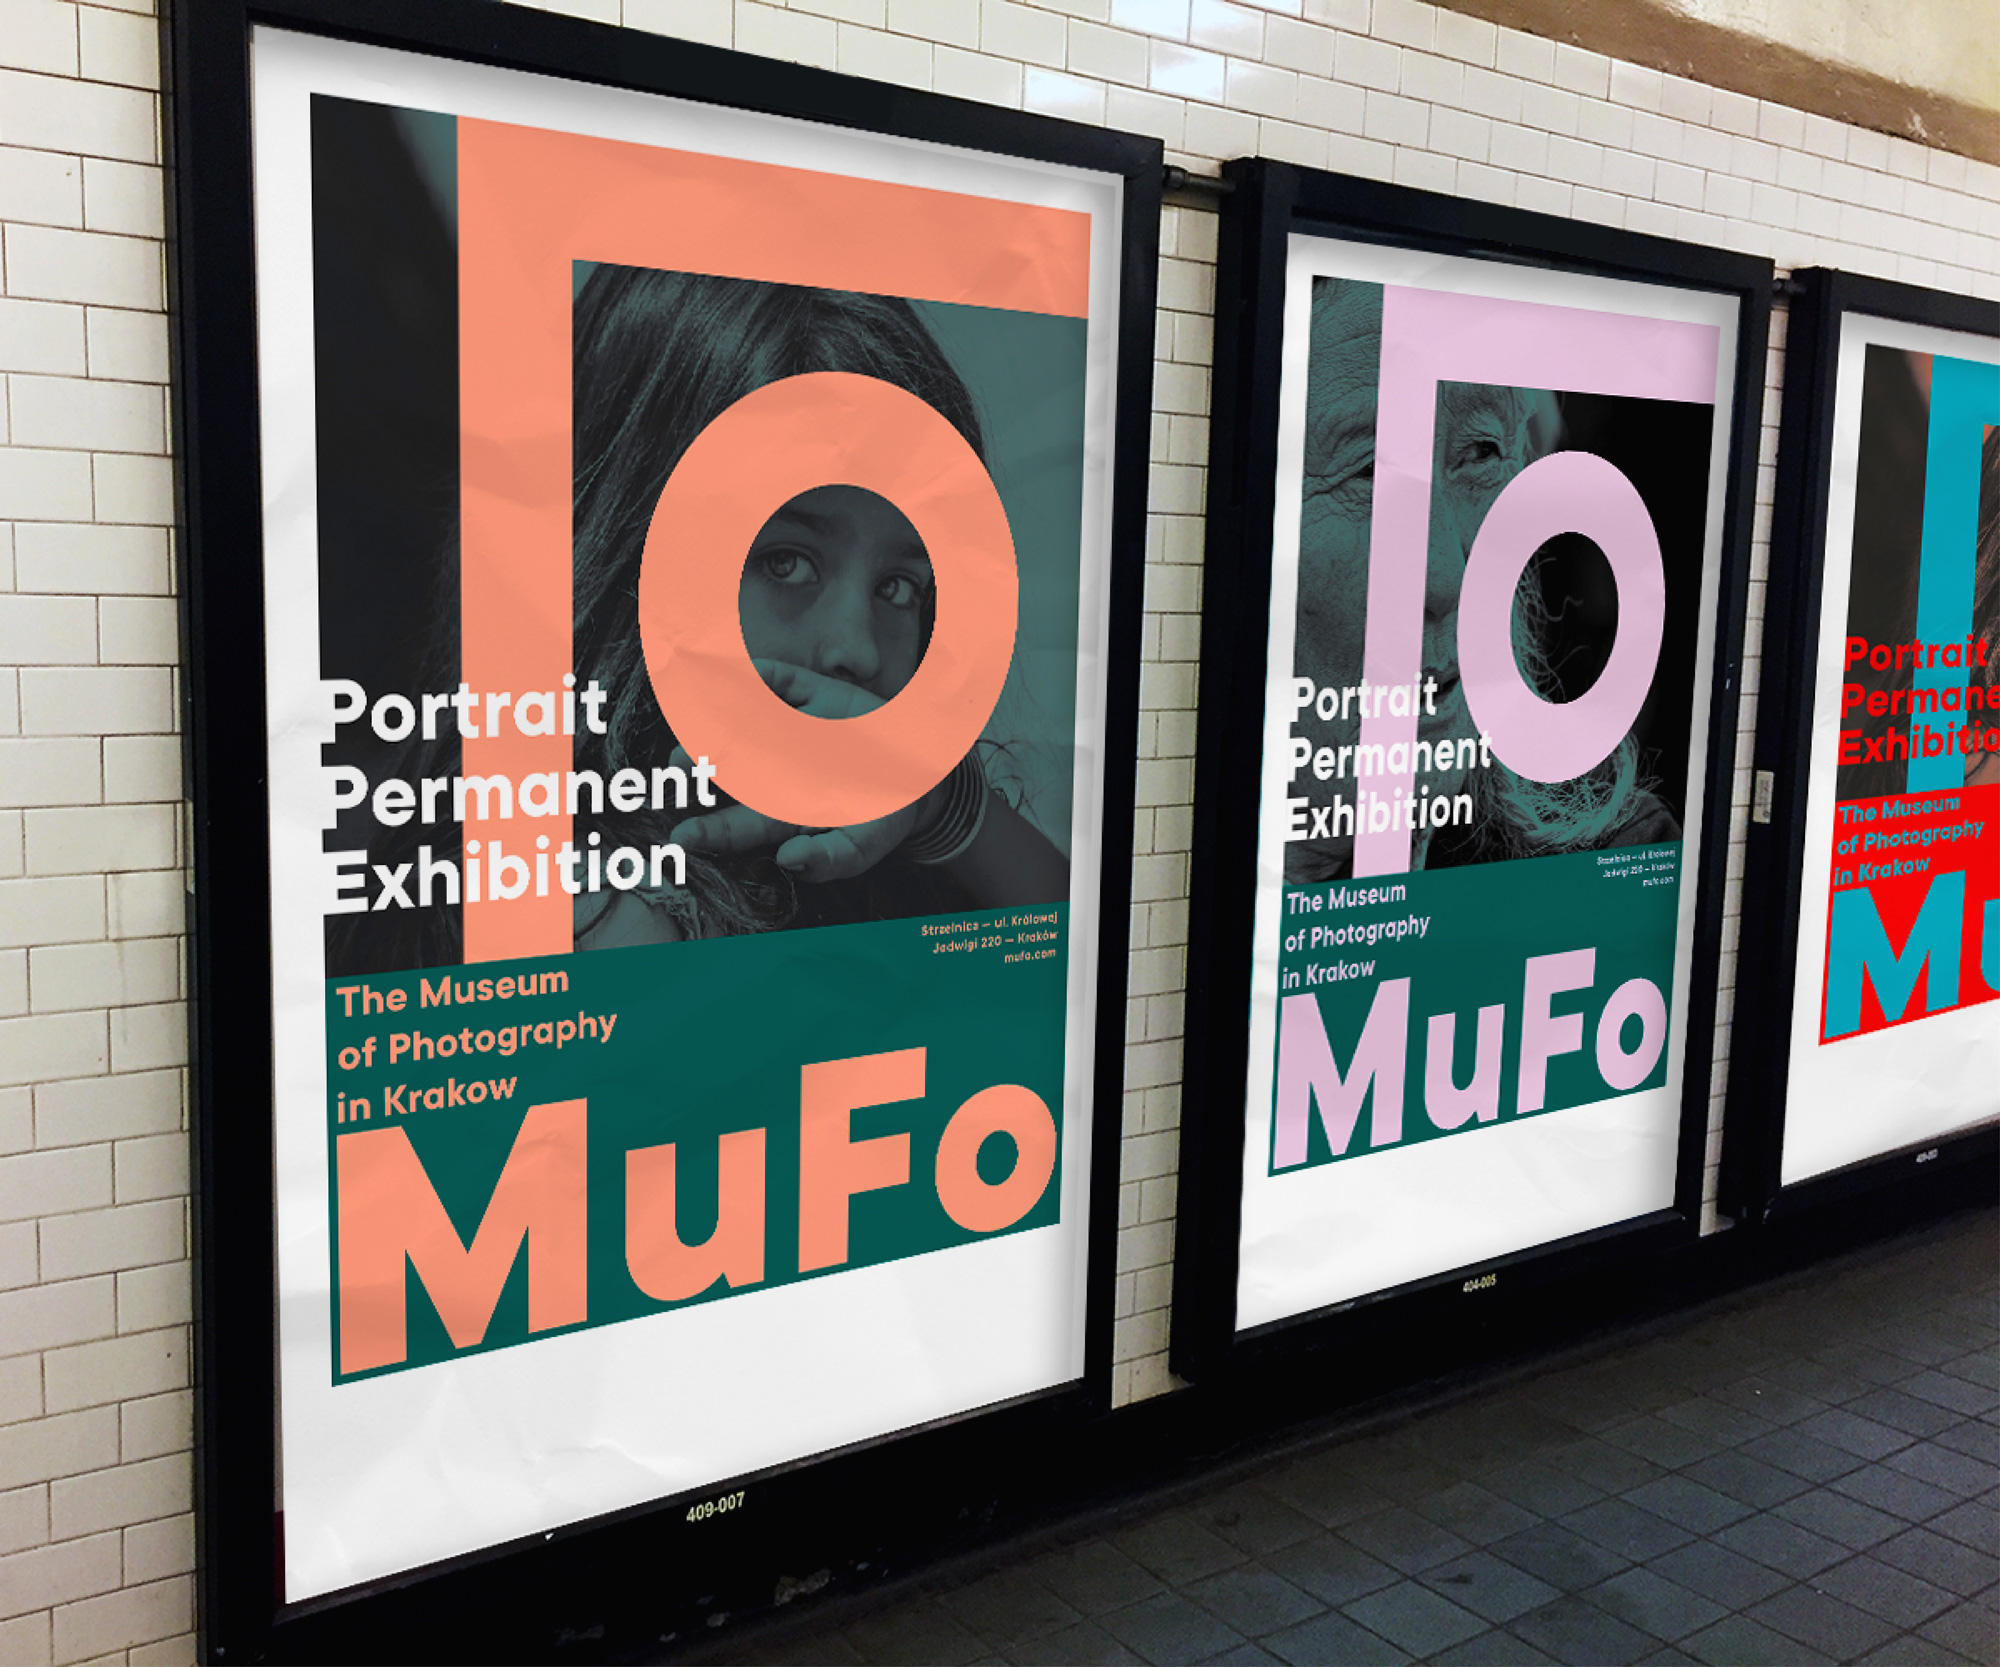 New Logo and Identity for MoFu by Podpunkt